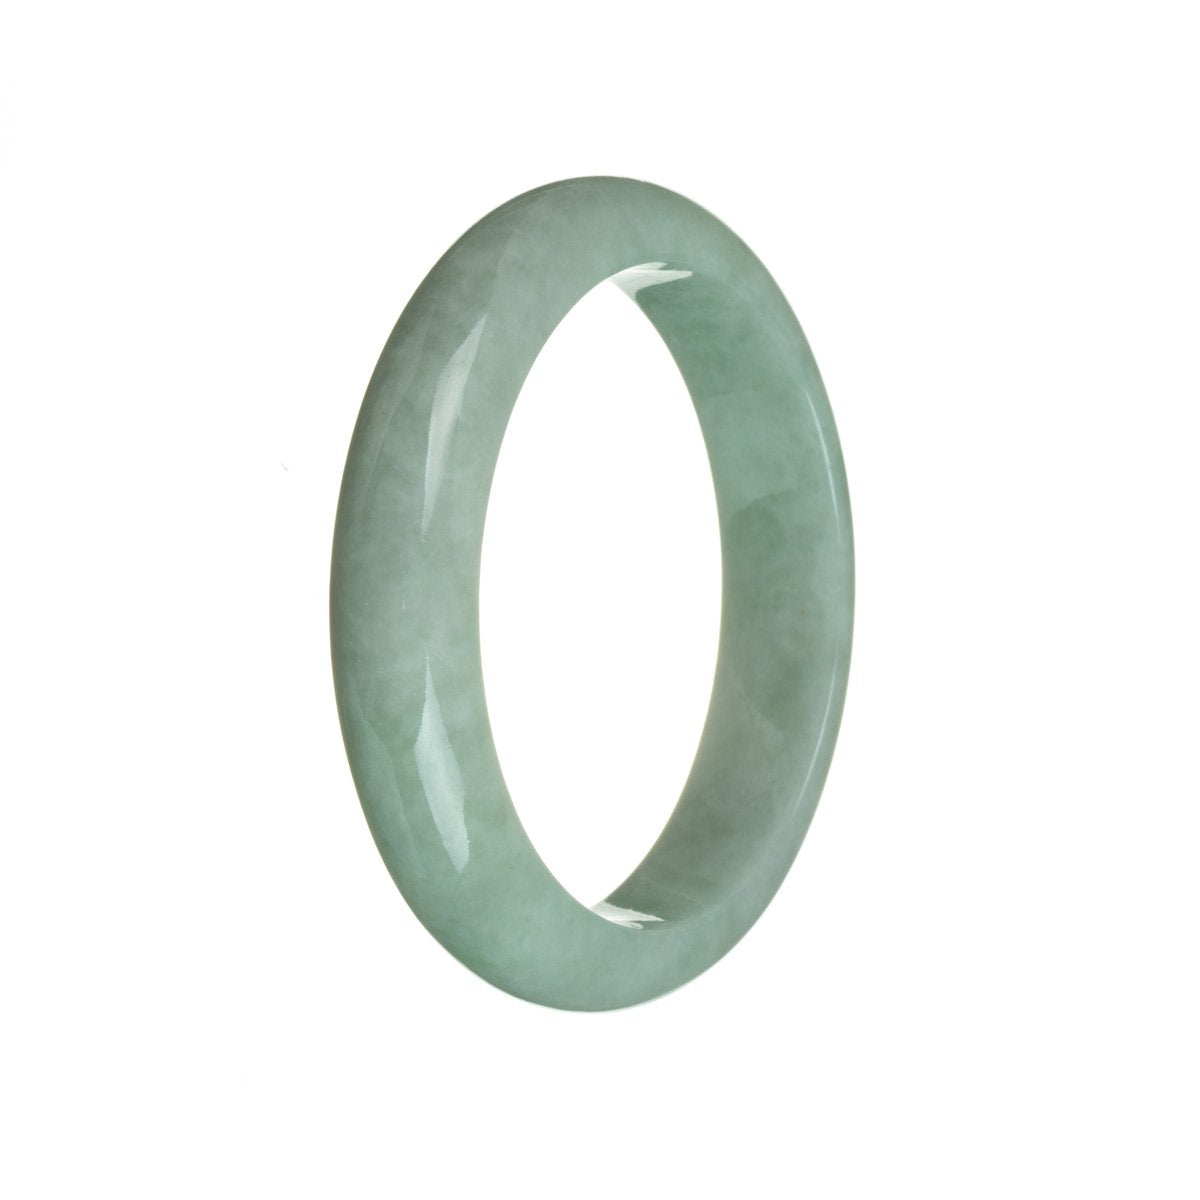 A close-up photograph of a green jadeite bangle. The bangle is semi-round in shape and has a smooth, polished surface. The green color of the jadeite is vibrant and rich, with slight variations in tone. The bangle appears to be of high quality and is certified as untreated, ensuring its genuine and natural properties. It measures 59mm in diameter, making it suitable for a medium-sized wrist. The brand name "MAYS" is also mentioned, indicating the manufacturer or seller of the bangle.